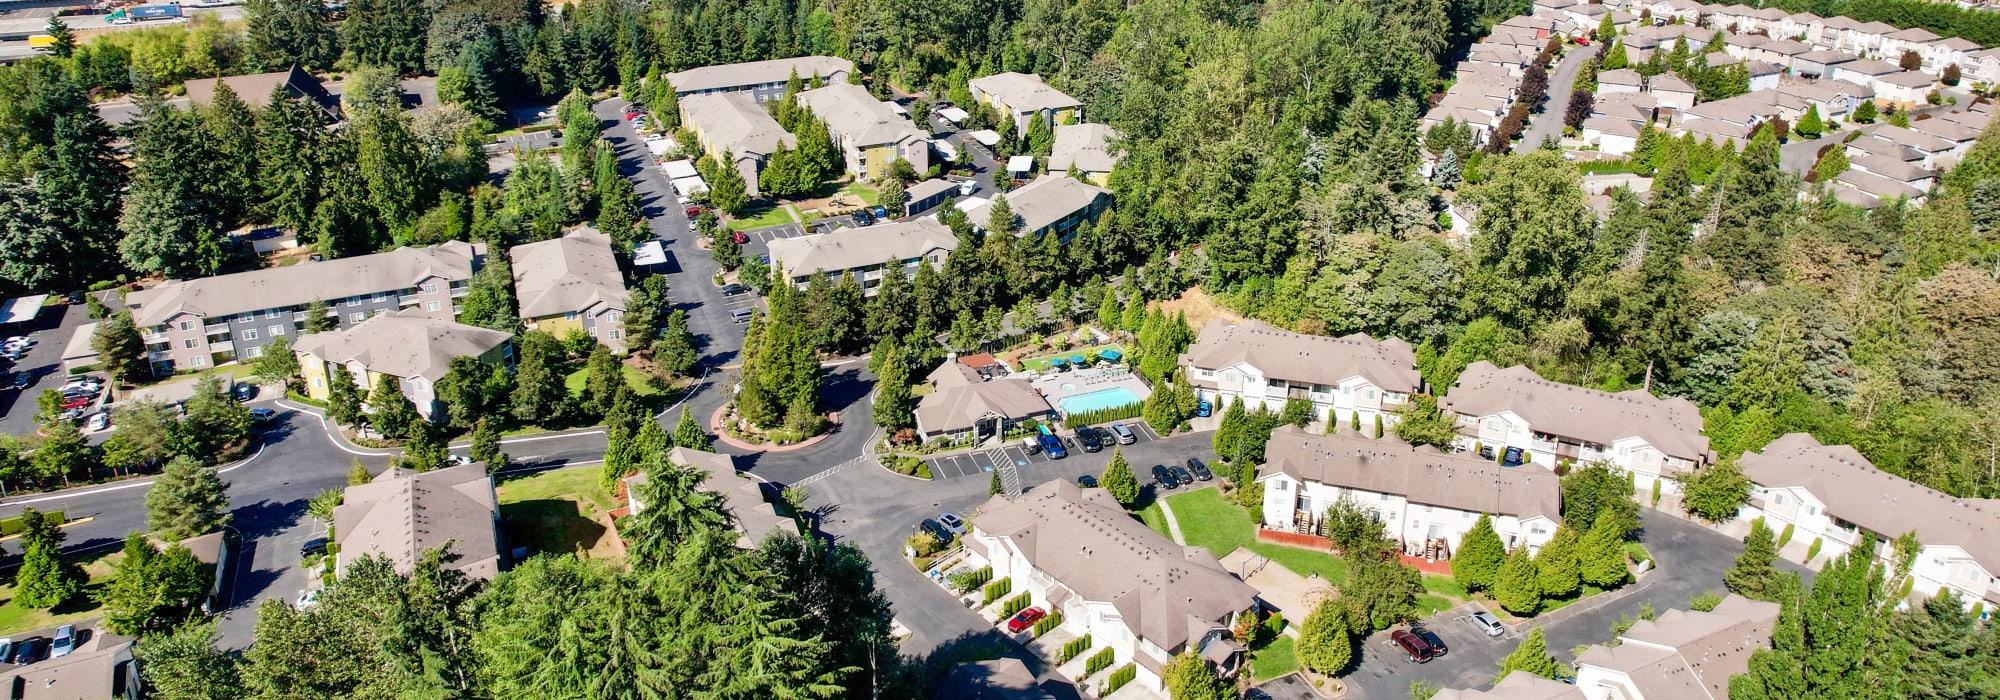 Privacy policy of Brookside Village in Auburn, Washington